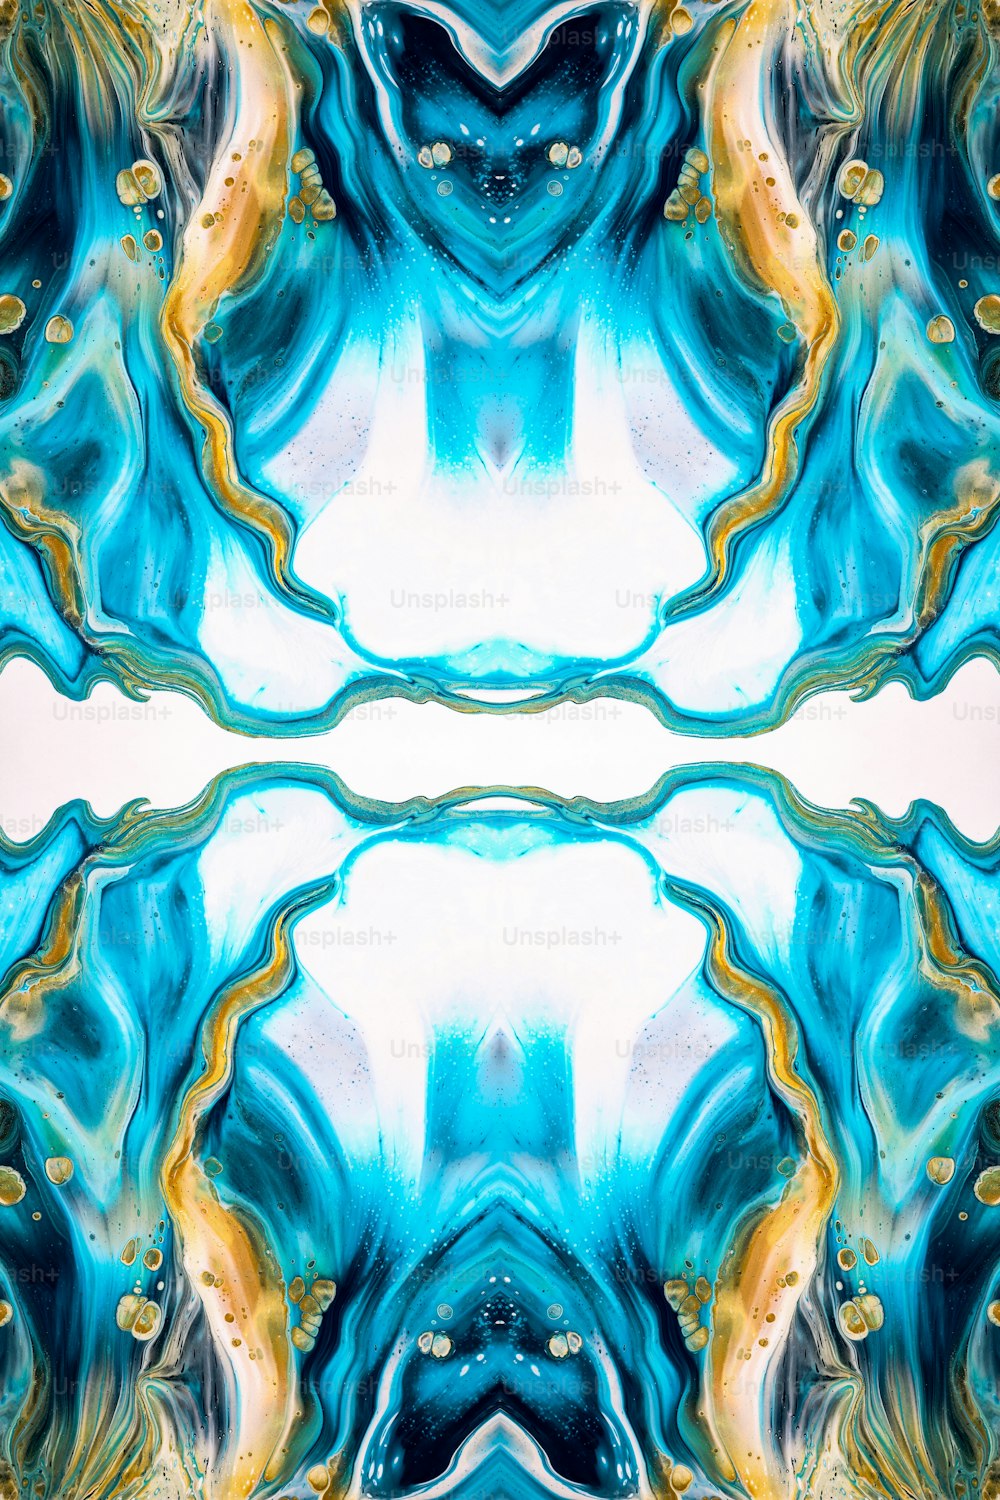 an abstract image of blue and yellow colors